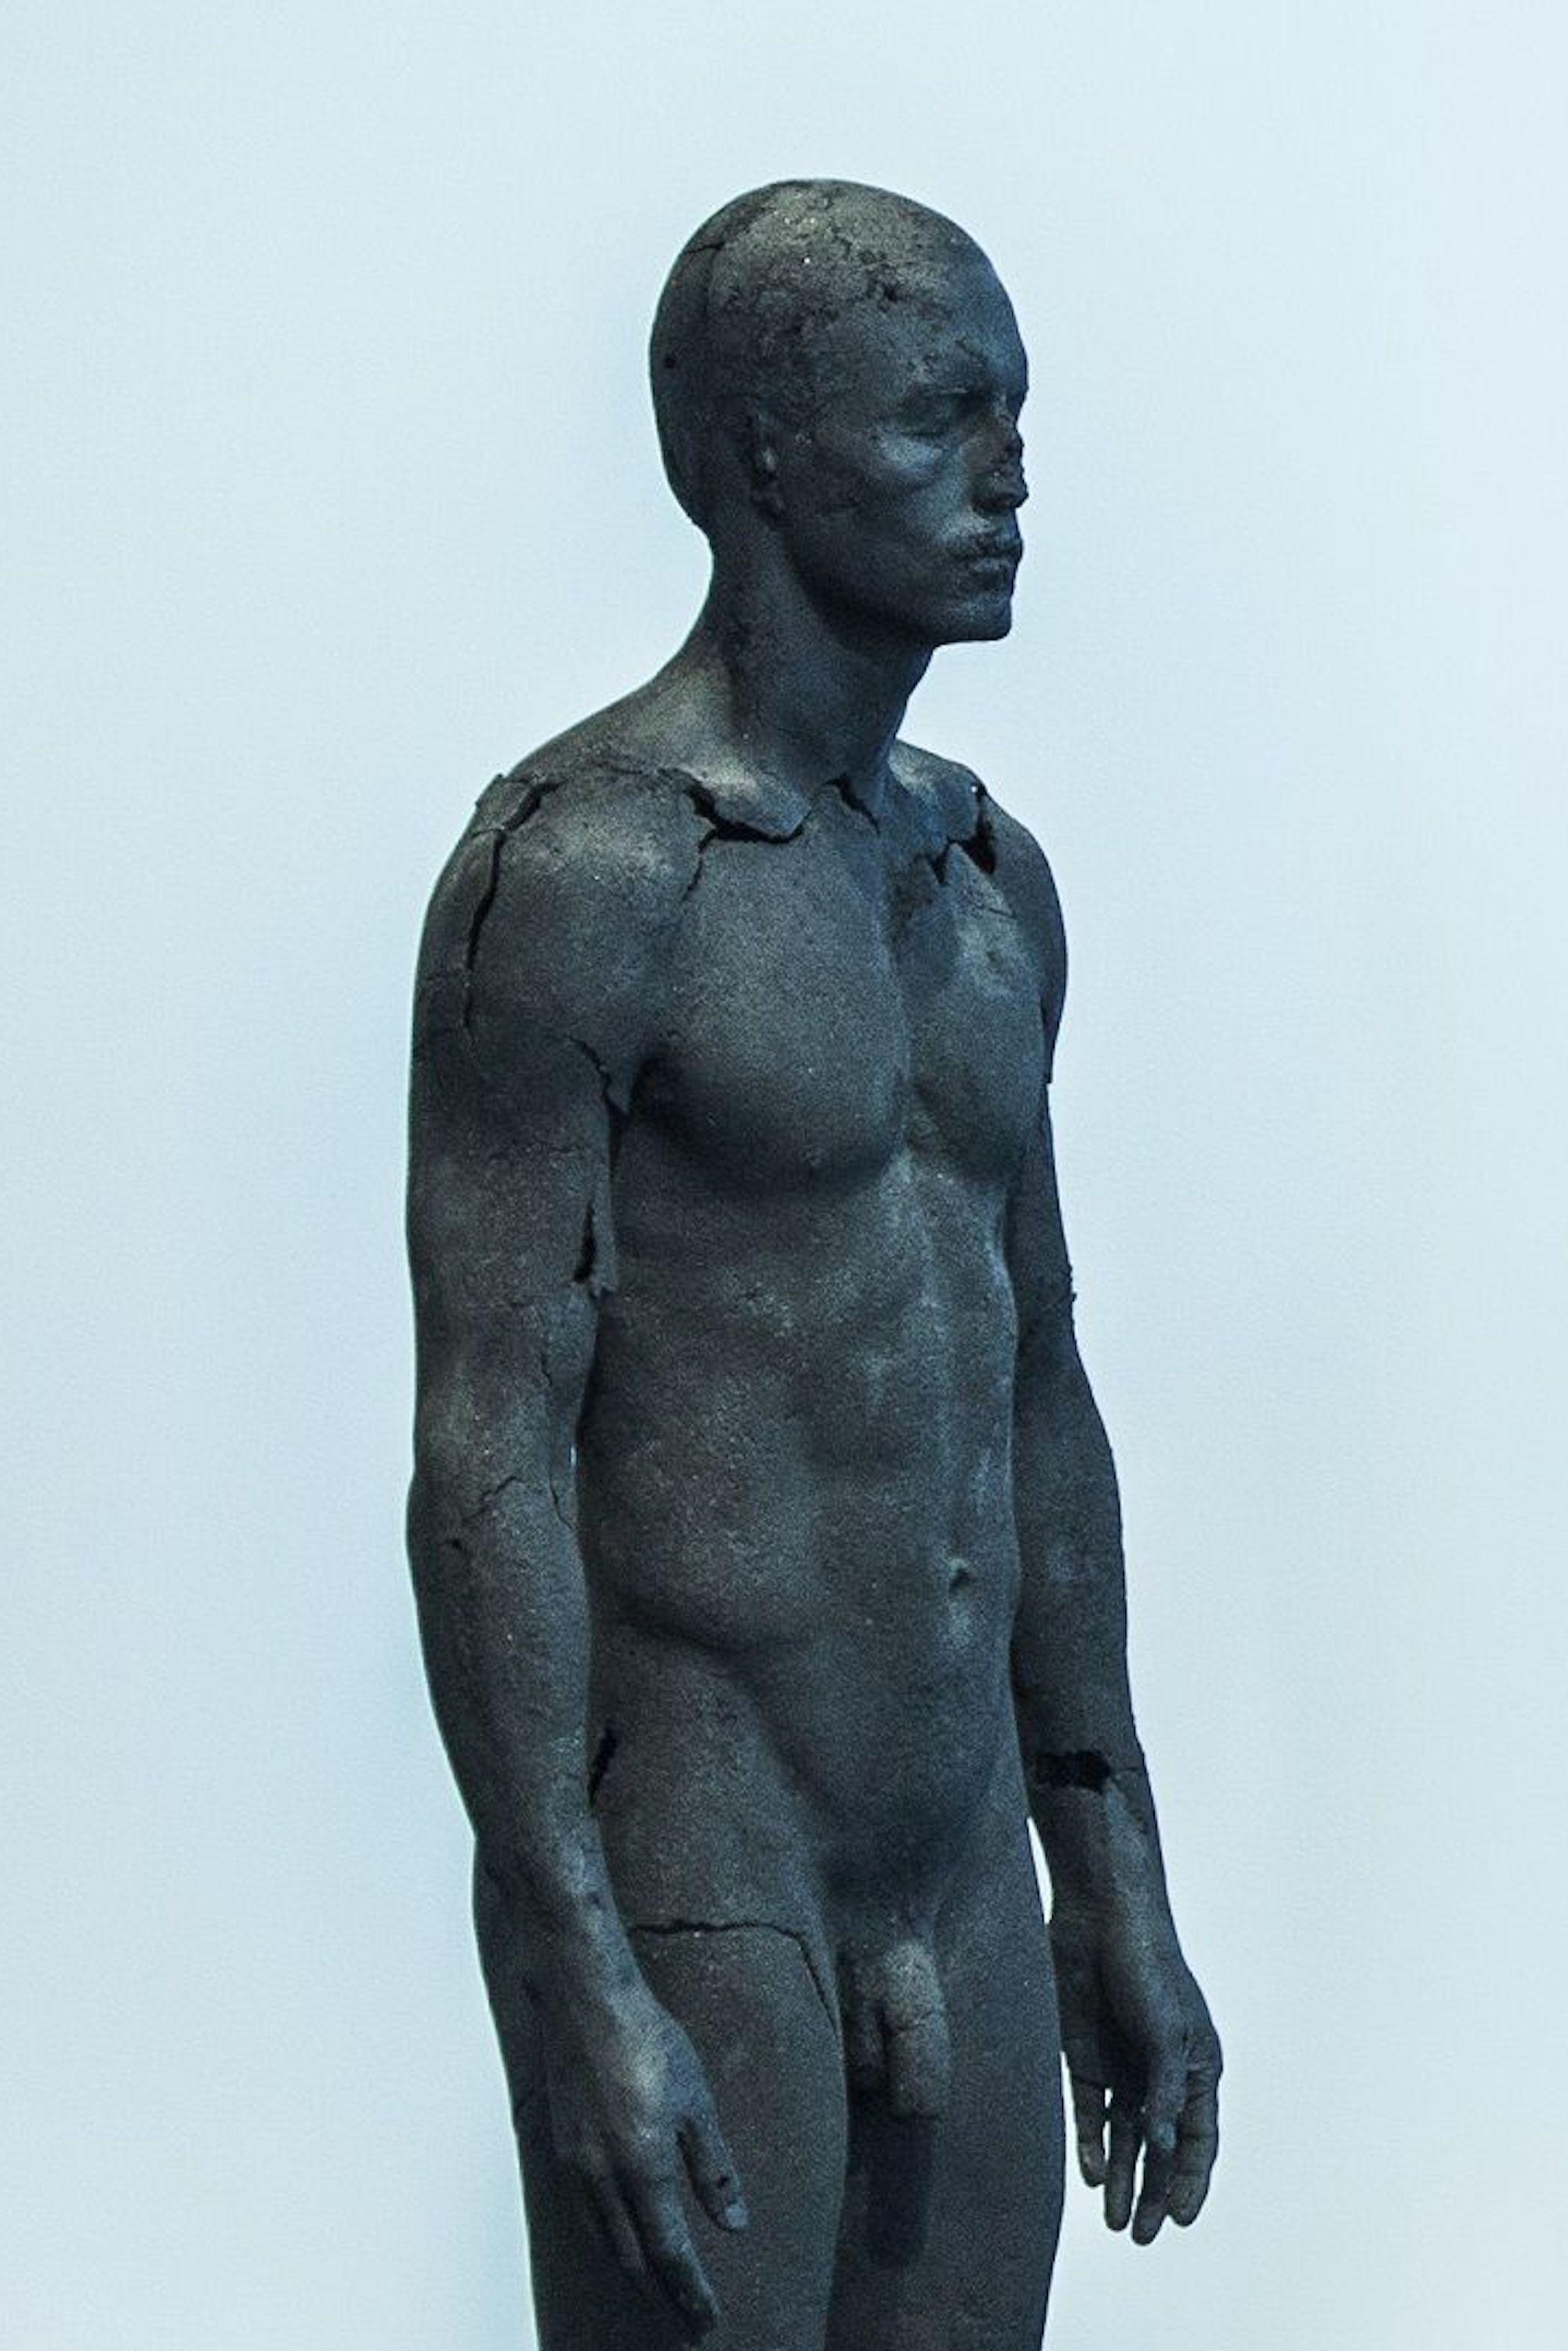 The Presence of Absence - Male (I) by Tom Price - Sculpture en charbon, corps nu en vente 3